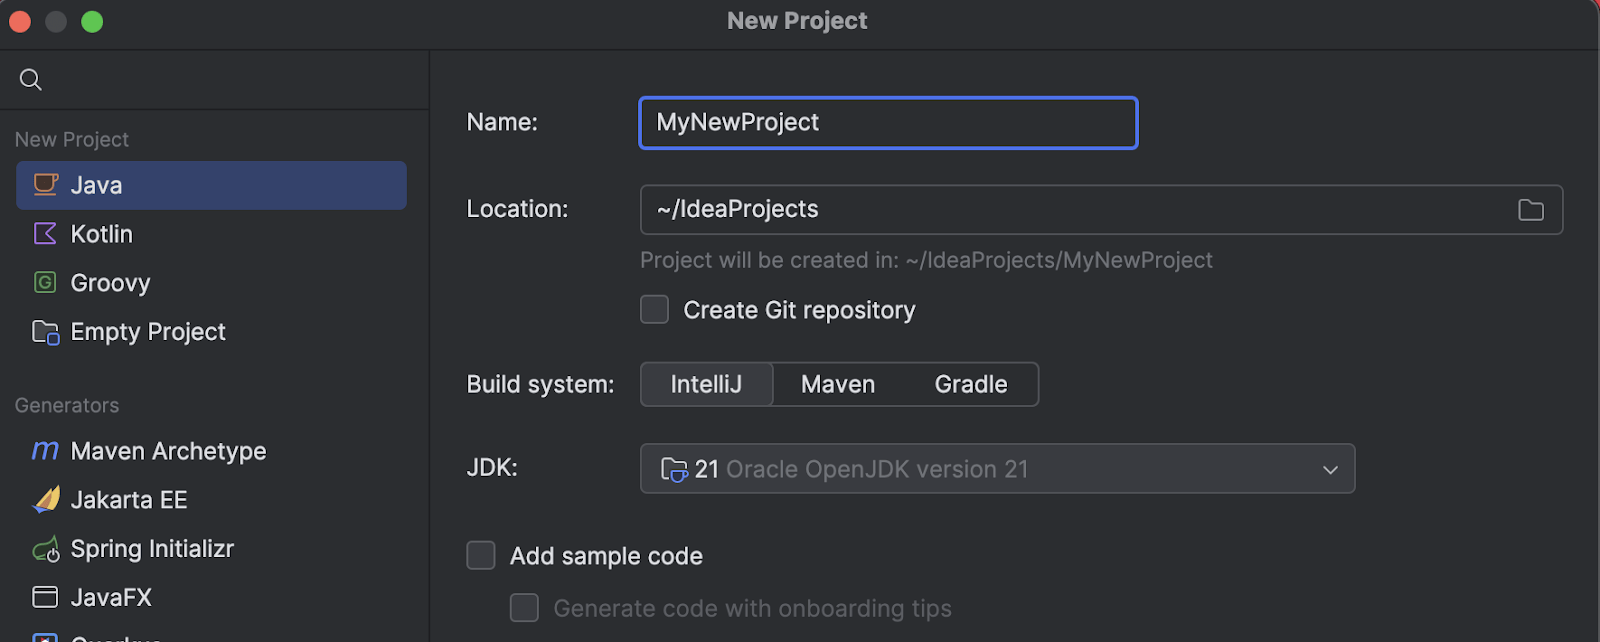 Updated New Project wizard